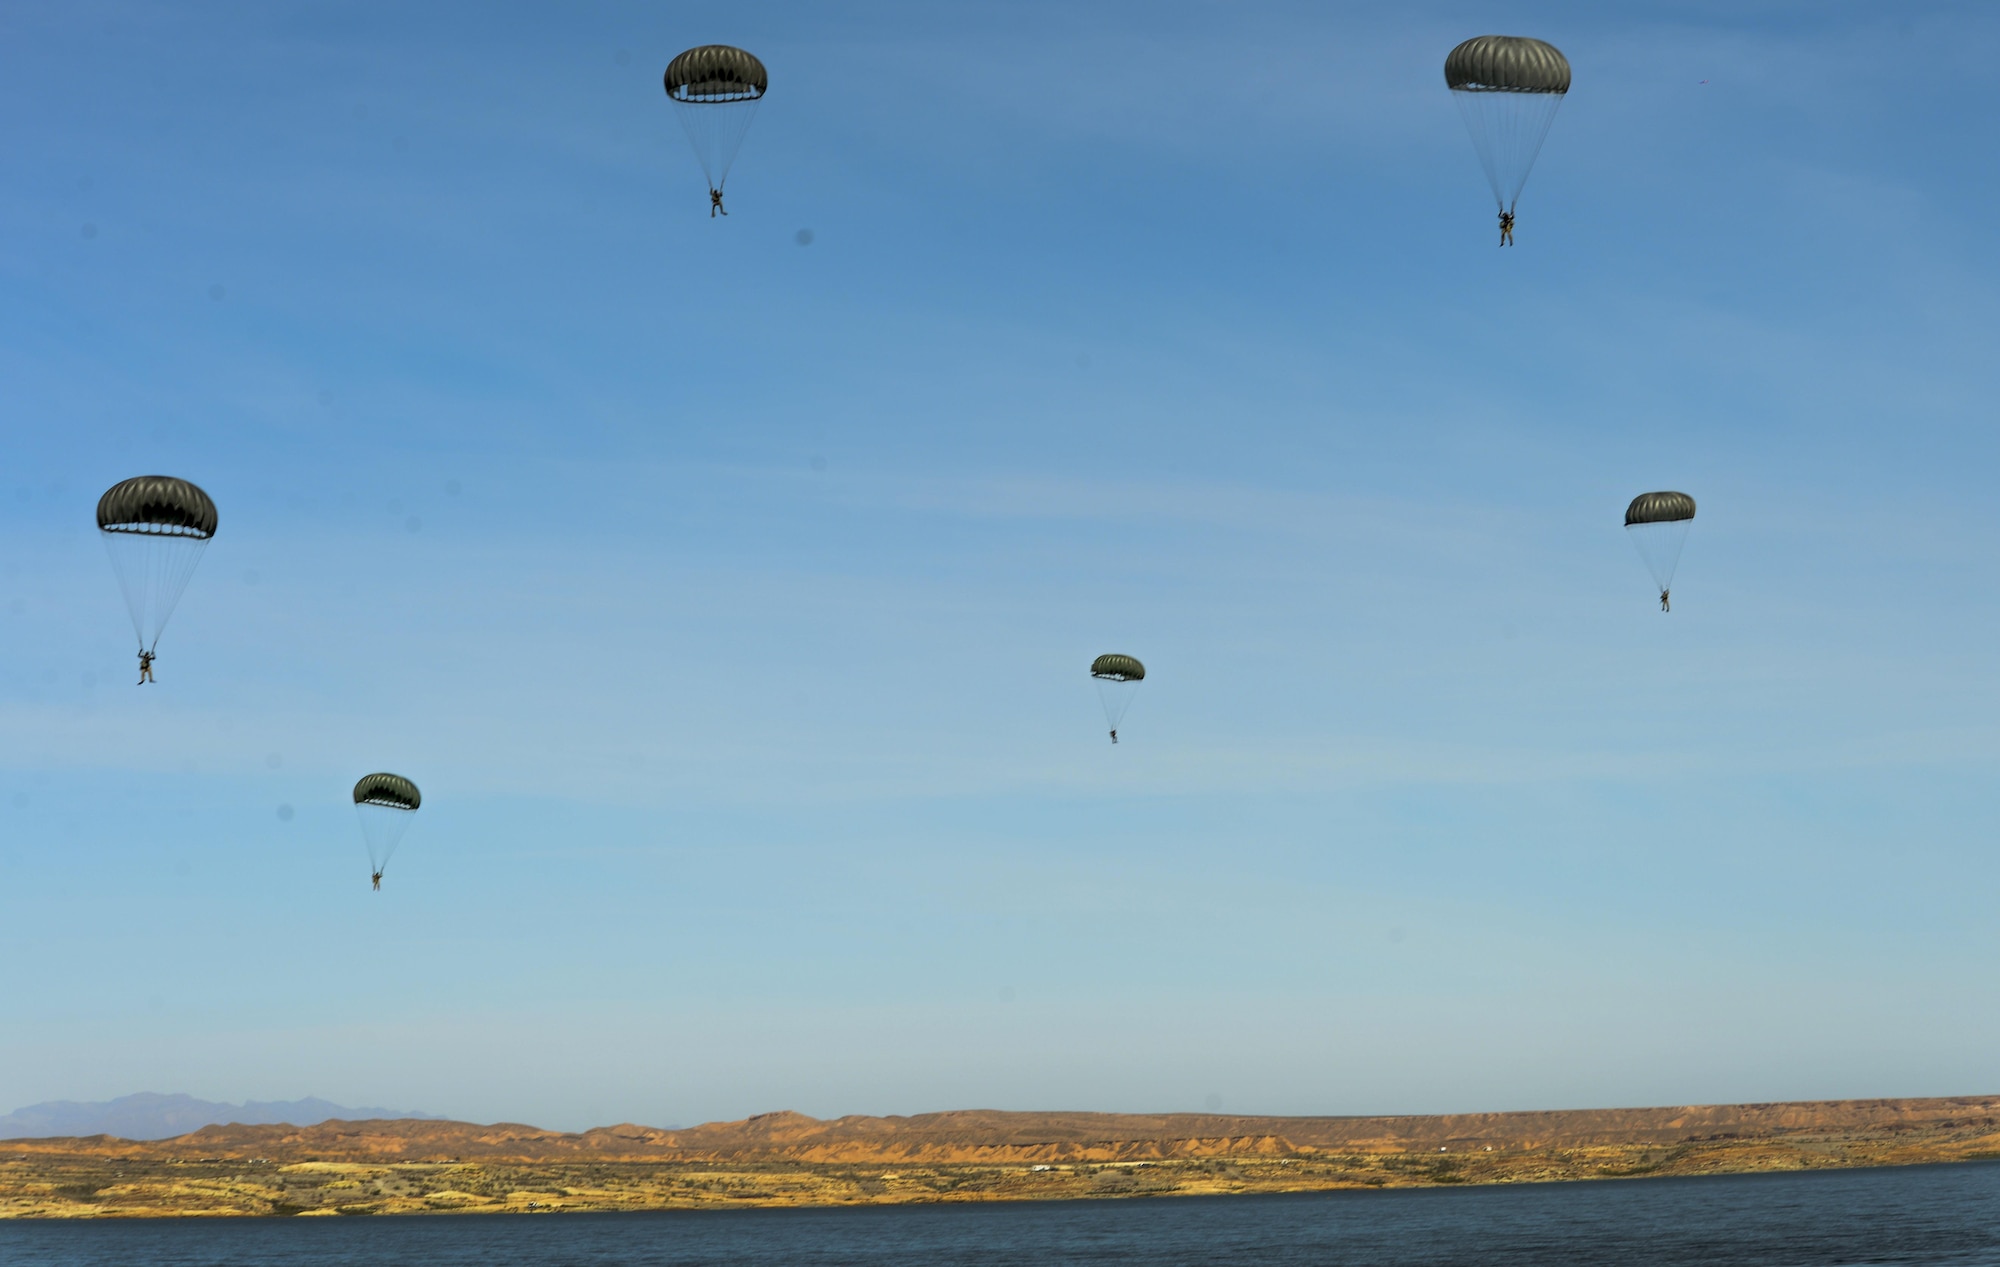 Pararescuemen assigned to the 58th Rescue Squadron at Nellis Air Force Base, Nevada, prepare to land on Lake Mead after preforming static line jumps March 15, 2016. All PJs are qualified experts in Advanced Weapons and Small Unit Tactics, Airborne and Military Free Fall, Combat Divers, High Angle/Confined Space Rescue operations, Small Boat/Vehicle Craft utilization, Rescue Swimmers, and Battlefield Trauma/Paramedics. (U.S. Air Force photo by Airman 1st Class Kevin Tanenbaum)